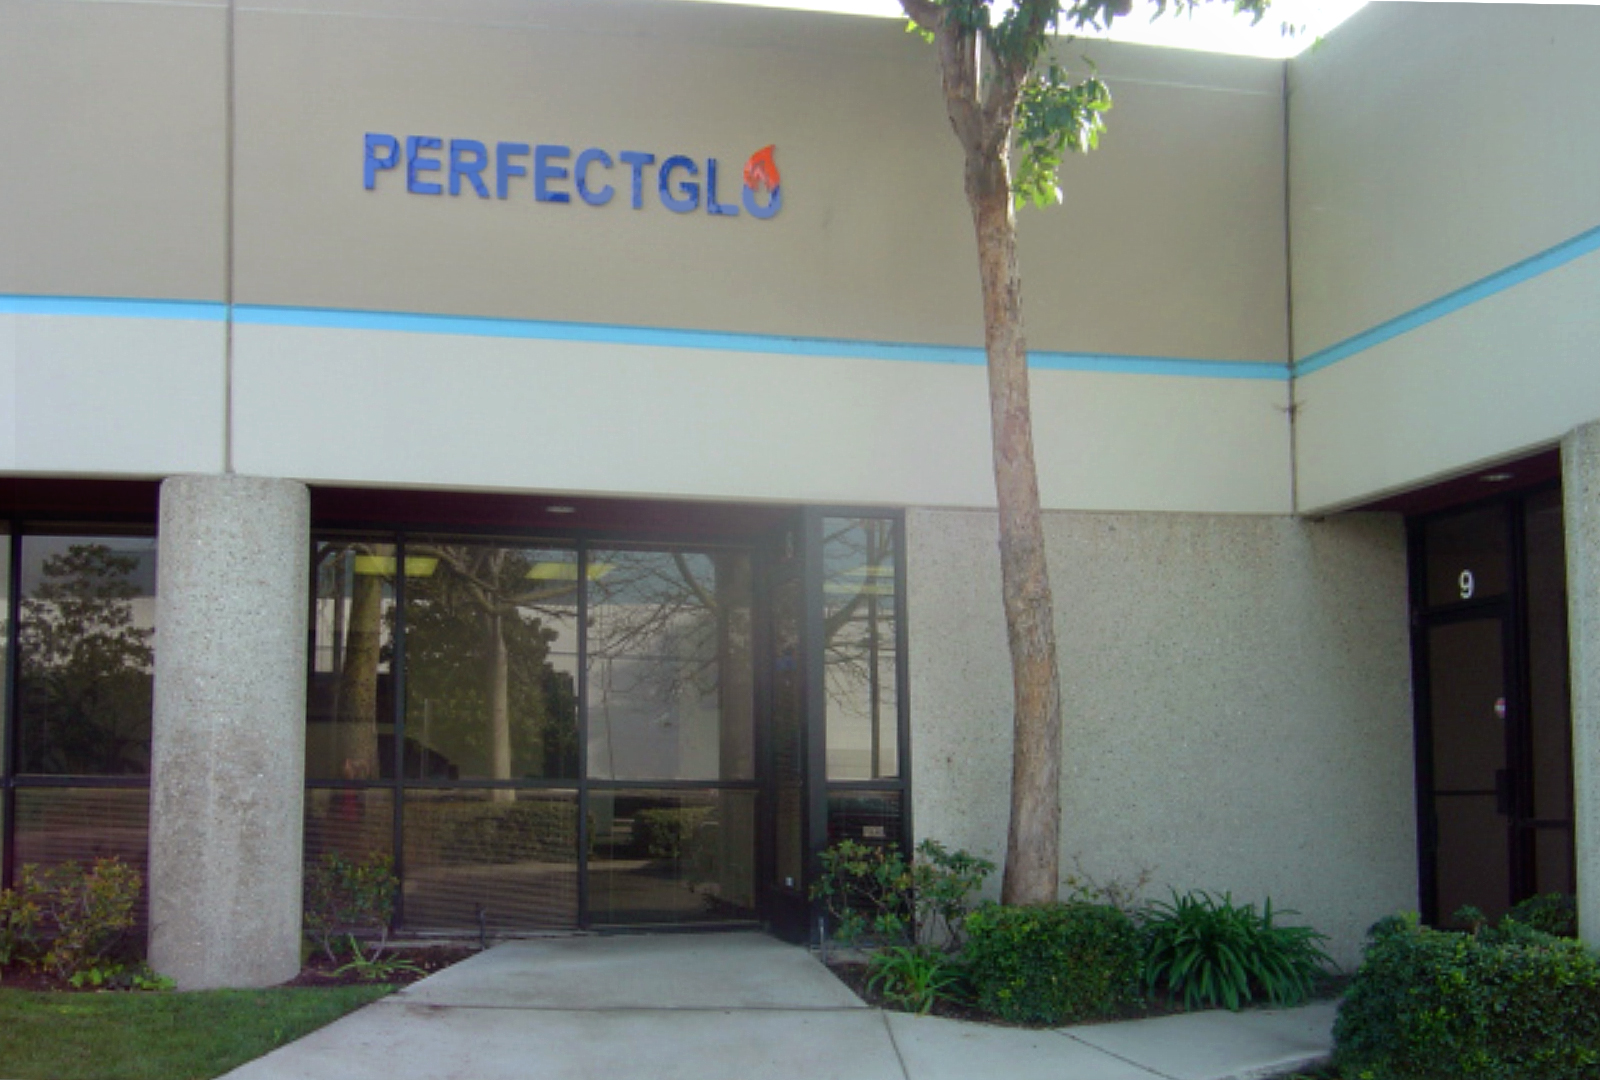 2003 - Company launched as Perfectglo. Now Permasteel.